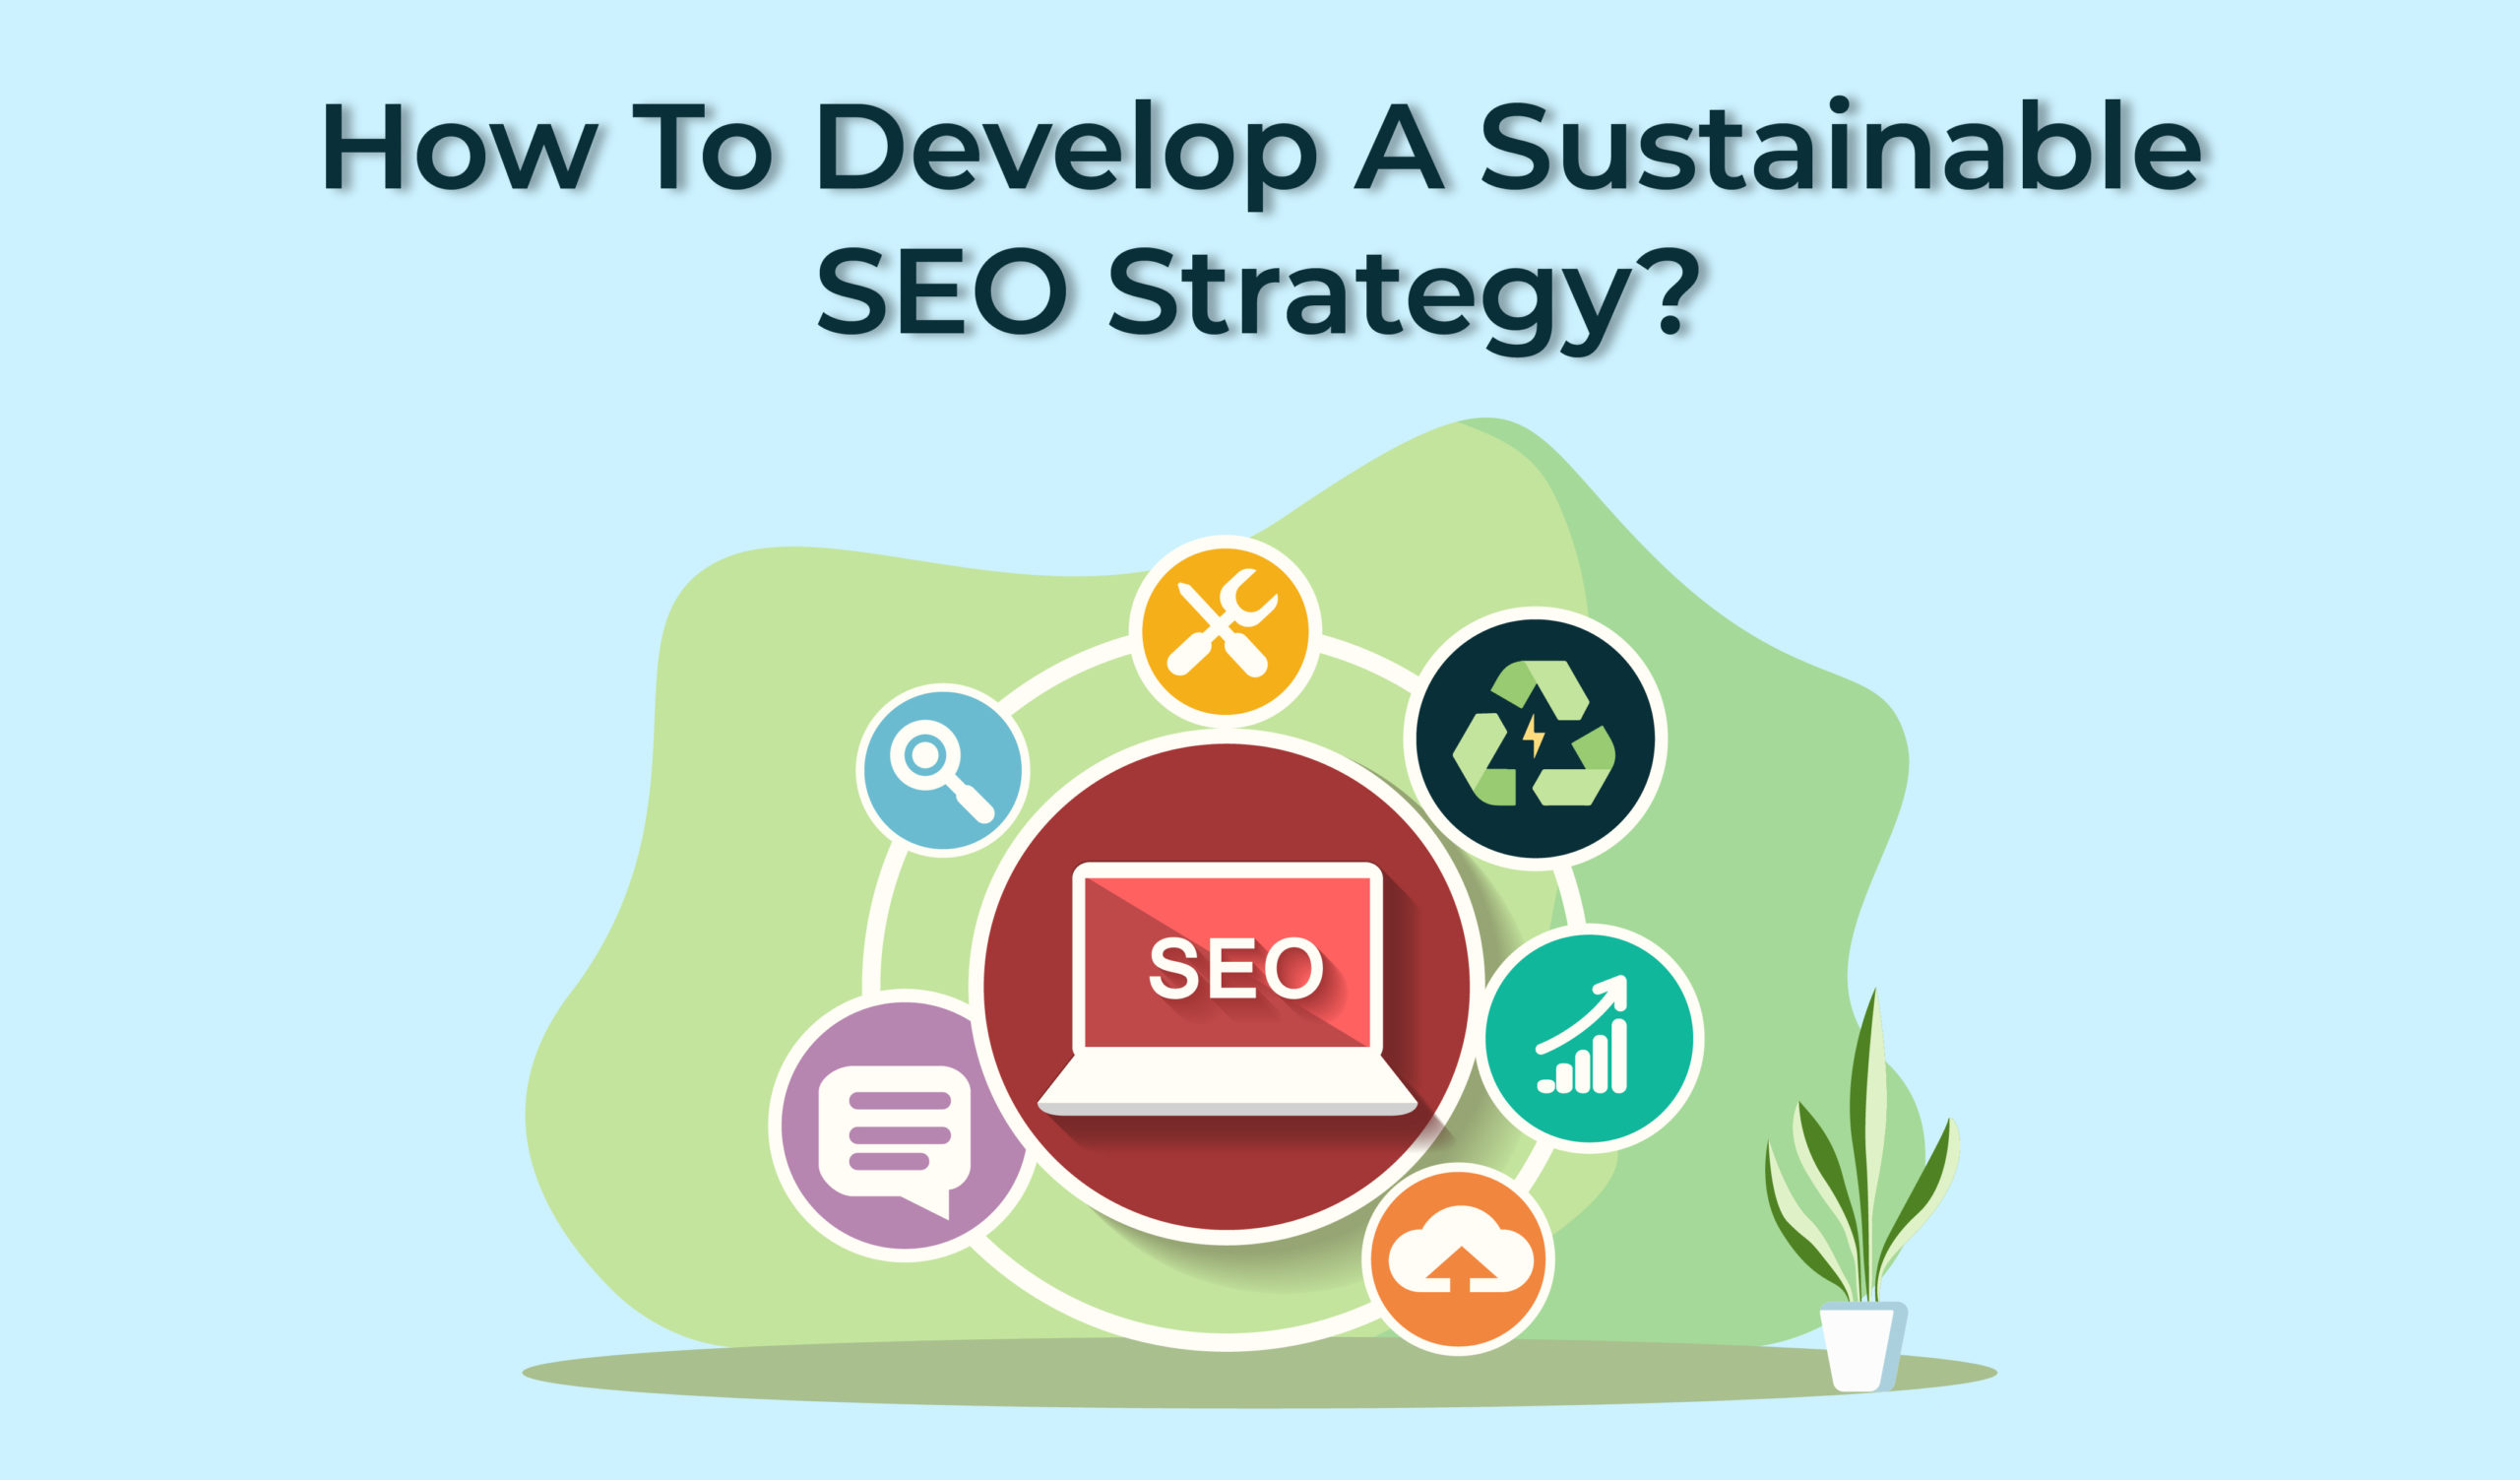 How to develop a sustainable SEO strategy?